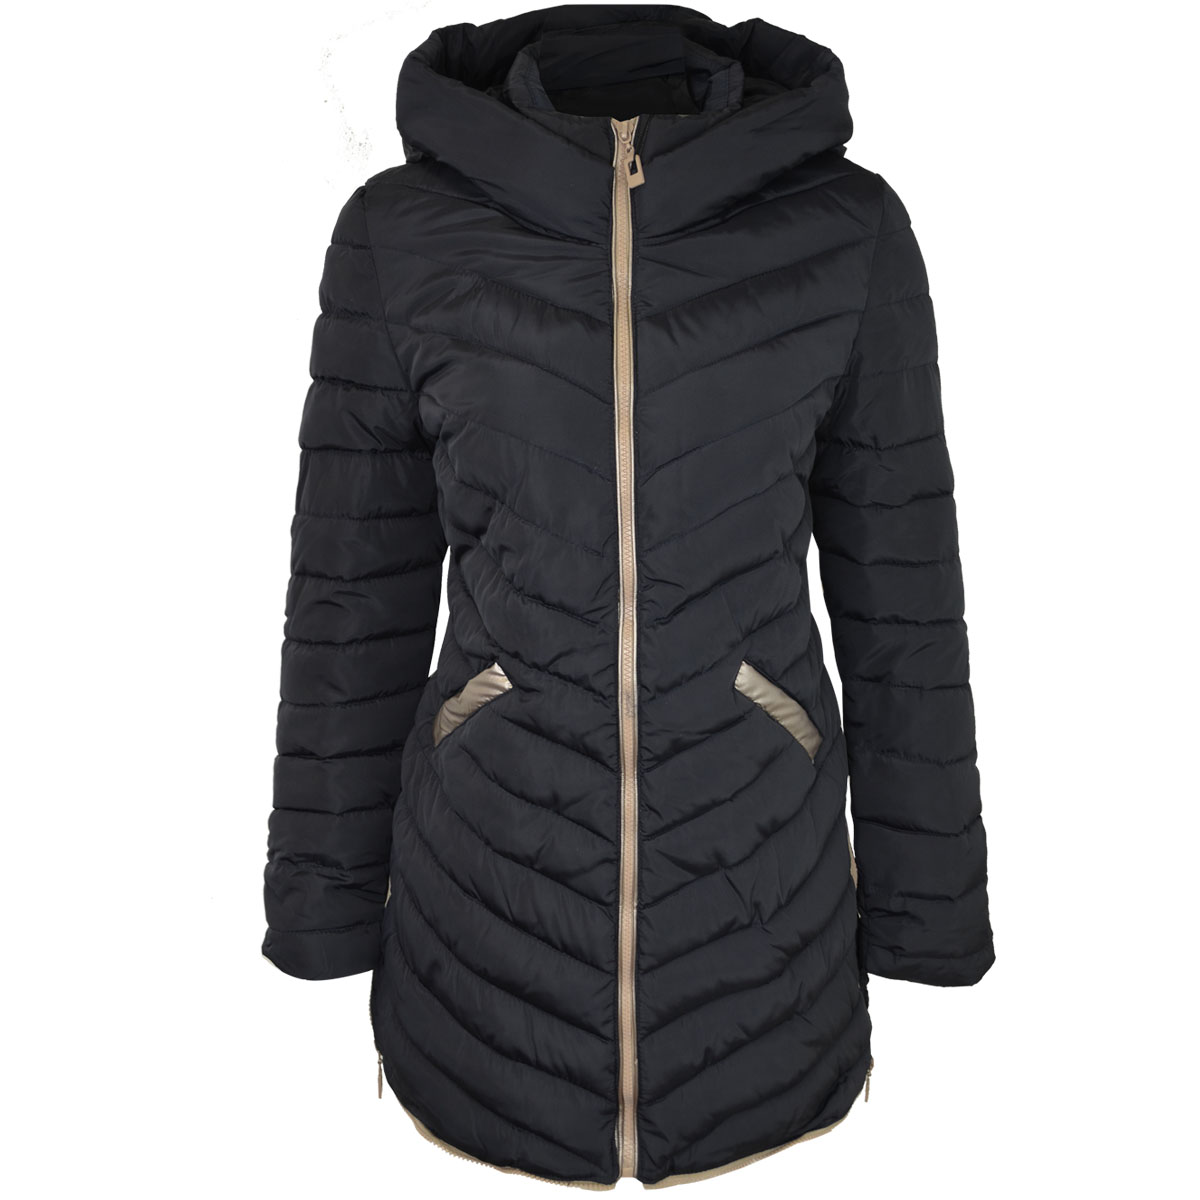 Ladies Womens Long Padded Hooded Quilted Winter Jacket Warm Coat ...